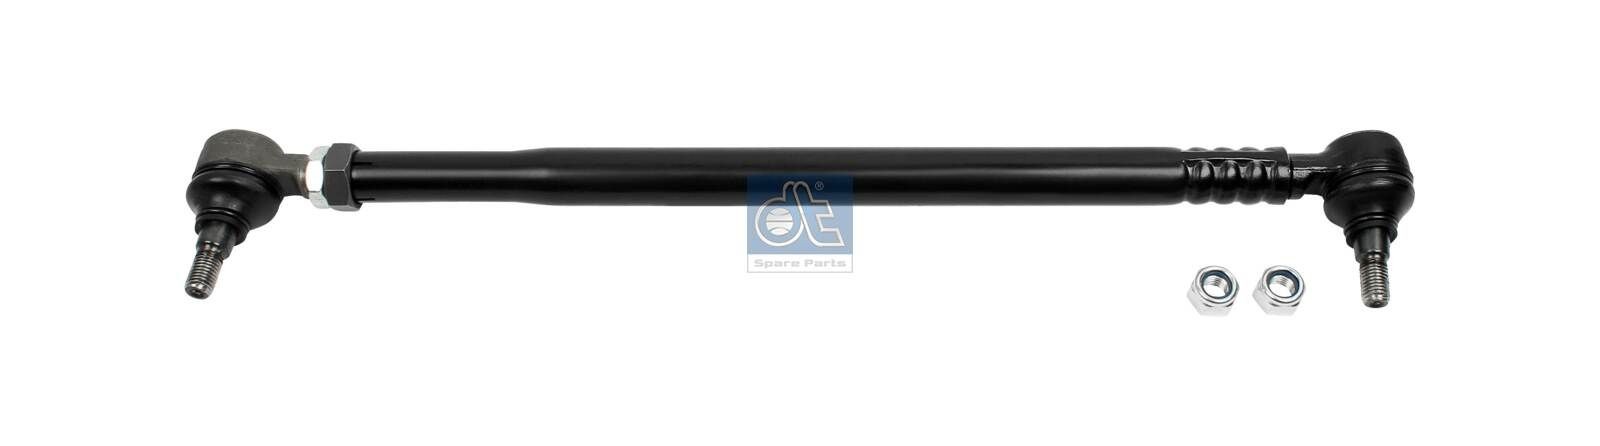 Volkswagen JETTA Centre Rod Assembly DT Spare Parts 11.45550 cheap